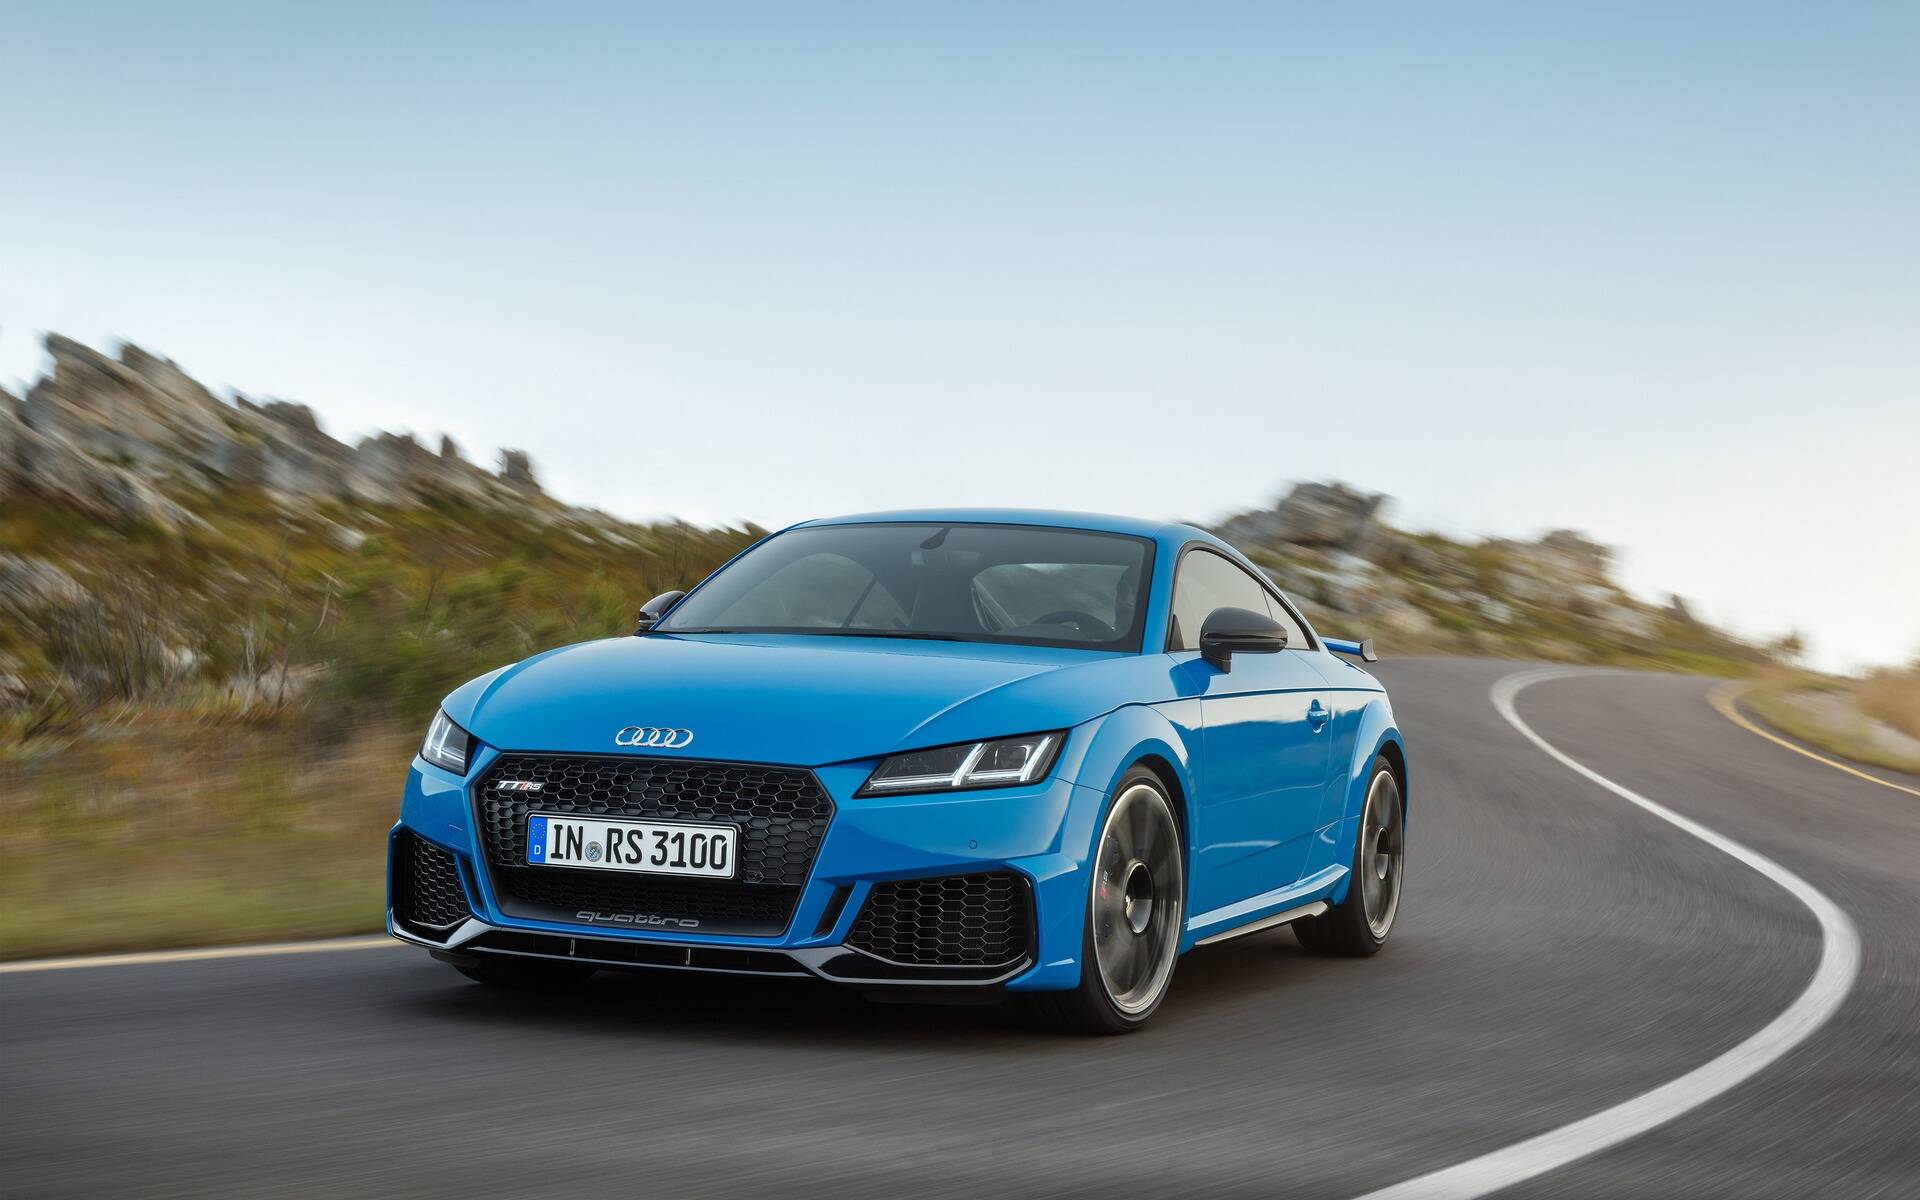 21 Audi Tt News Reviews Picture Galleries And Videos The Car Guide